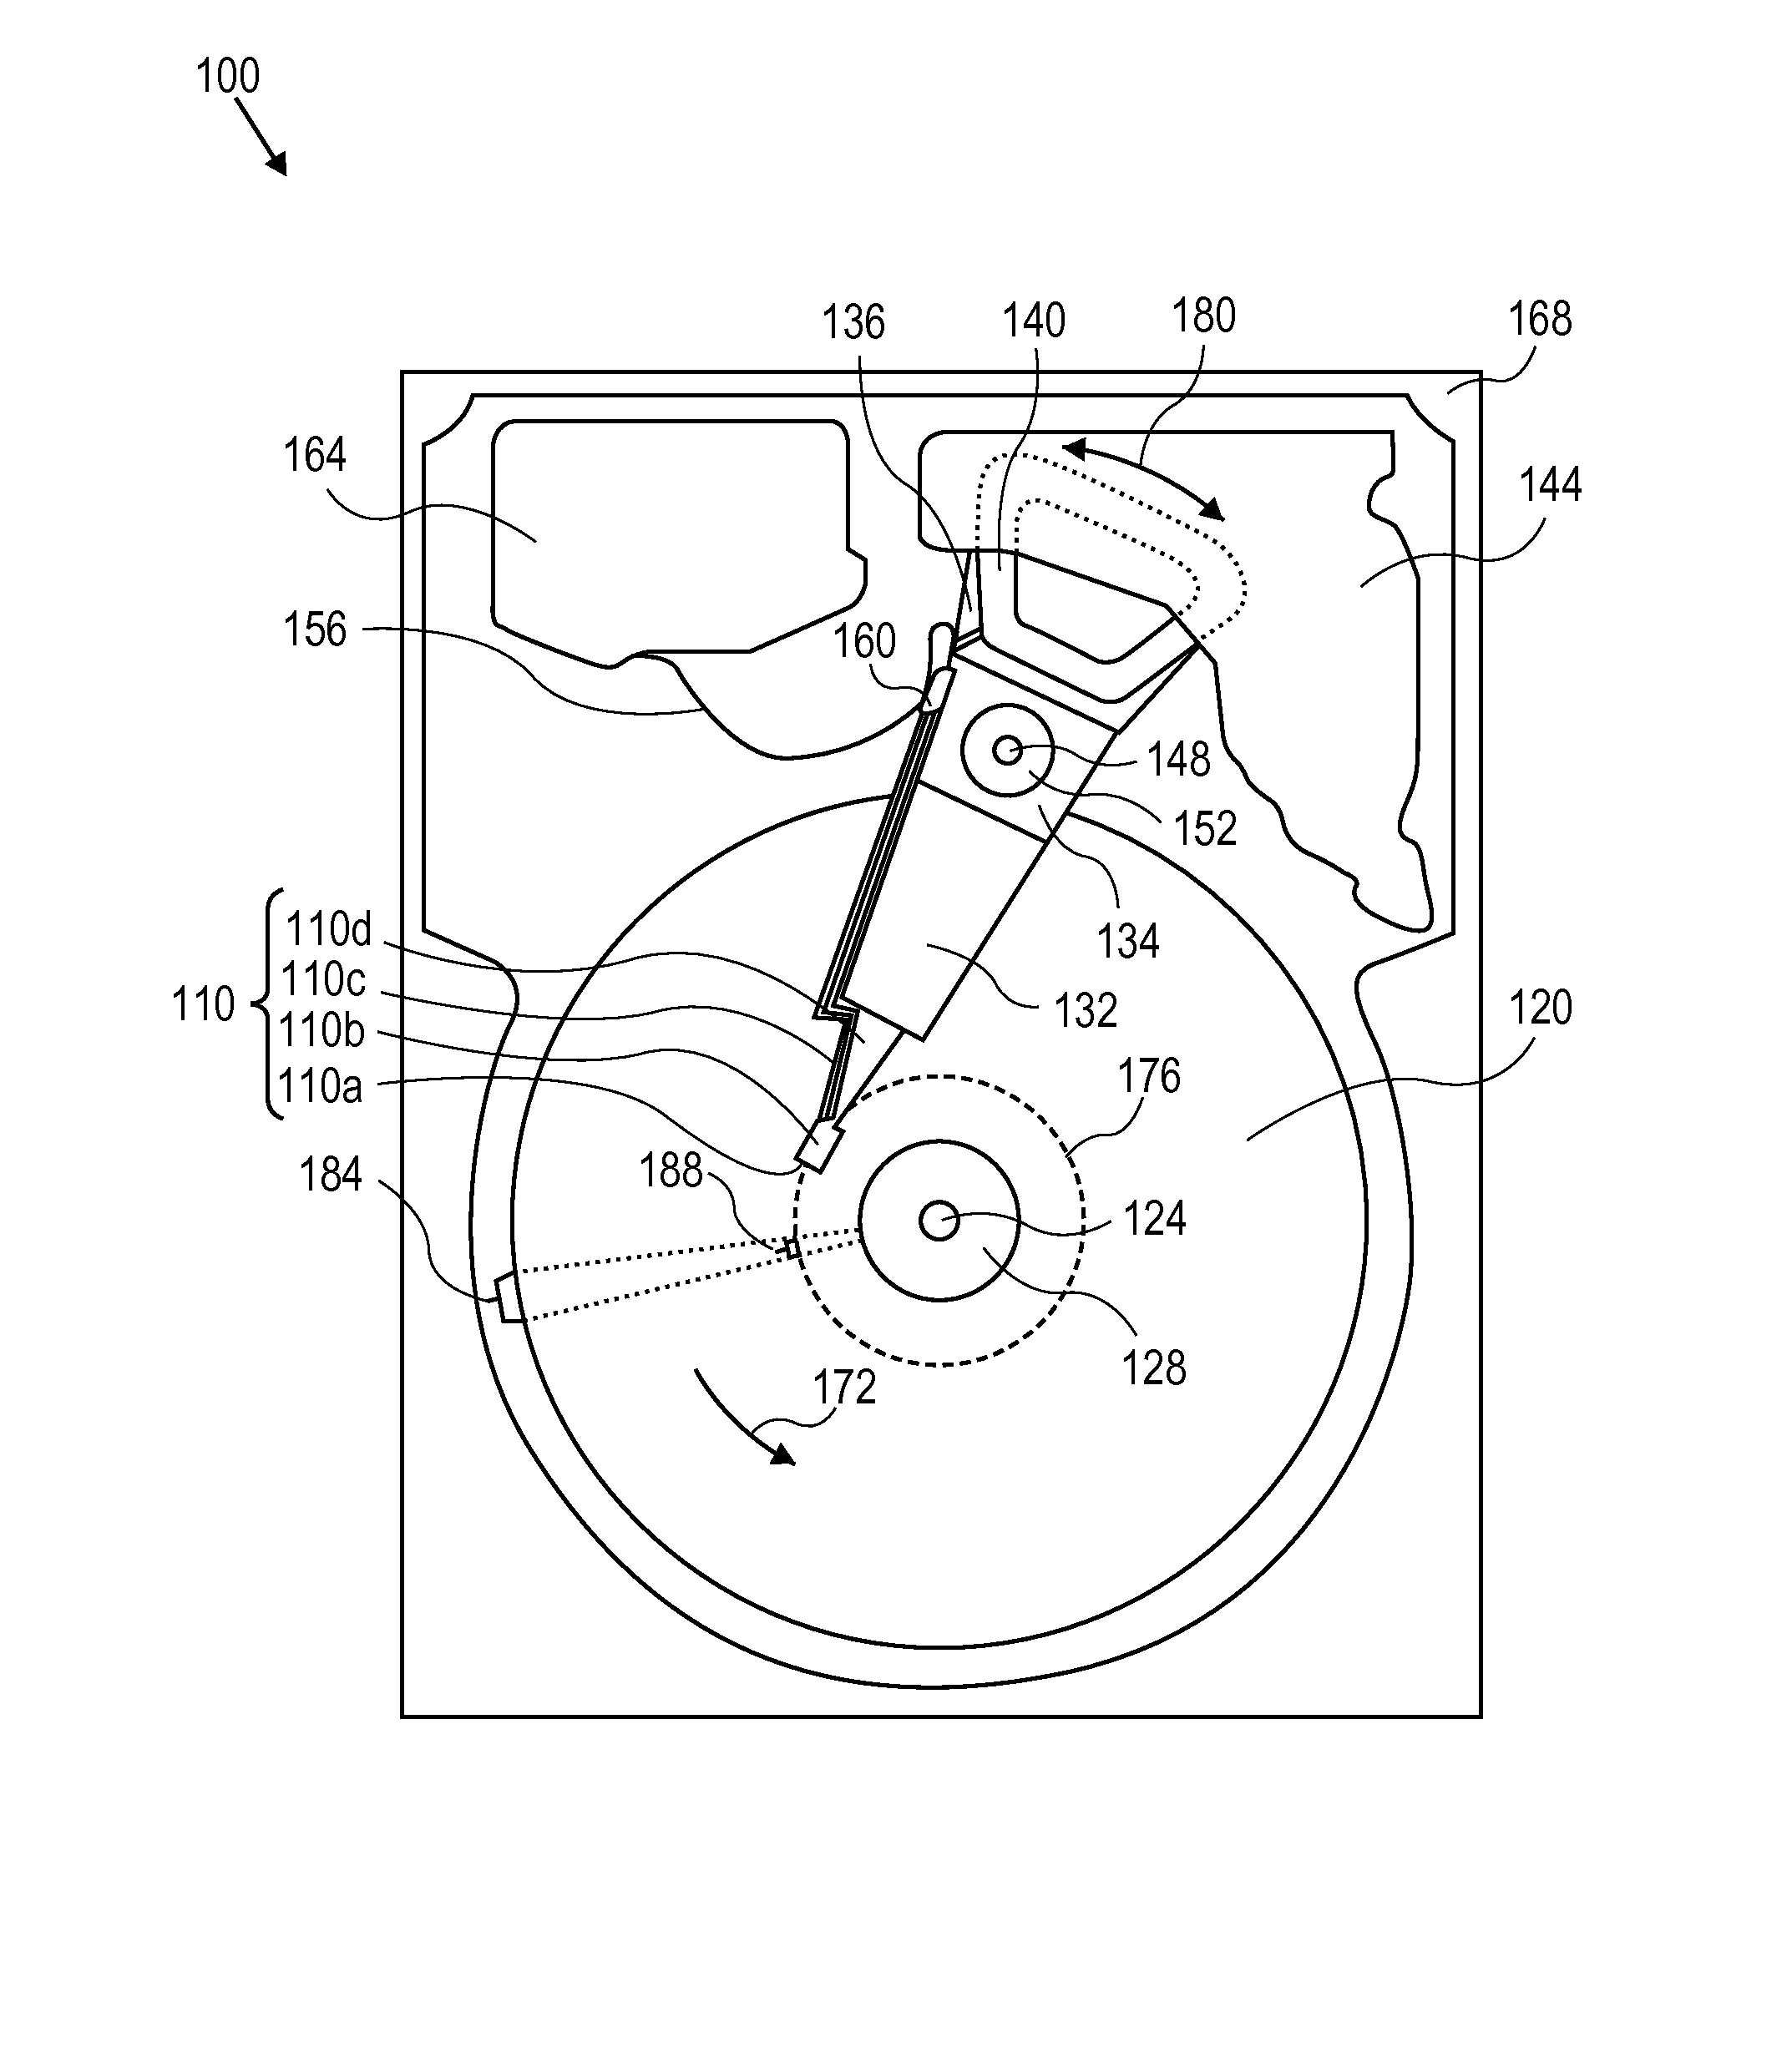 Electrical contact for an energy-assisted magnetic recording laser sub-mount